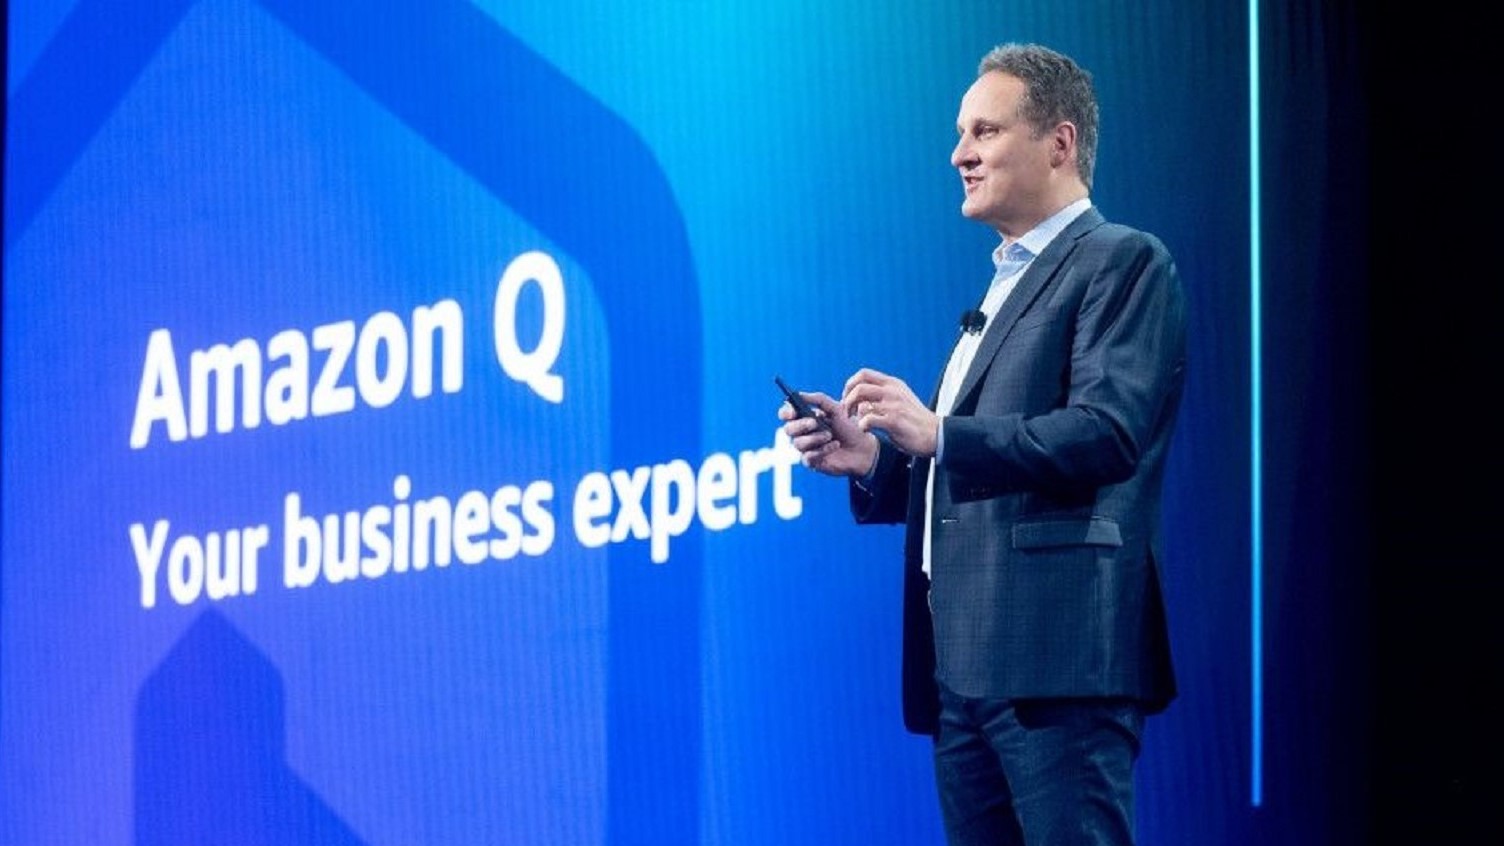 Amazon Q Chatbot Unveiled at re: Invent Conference